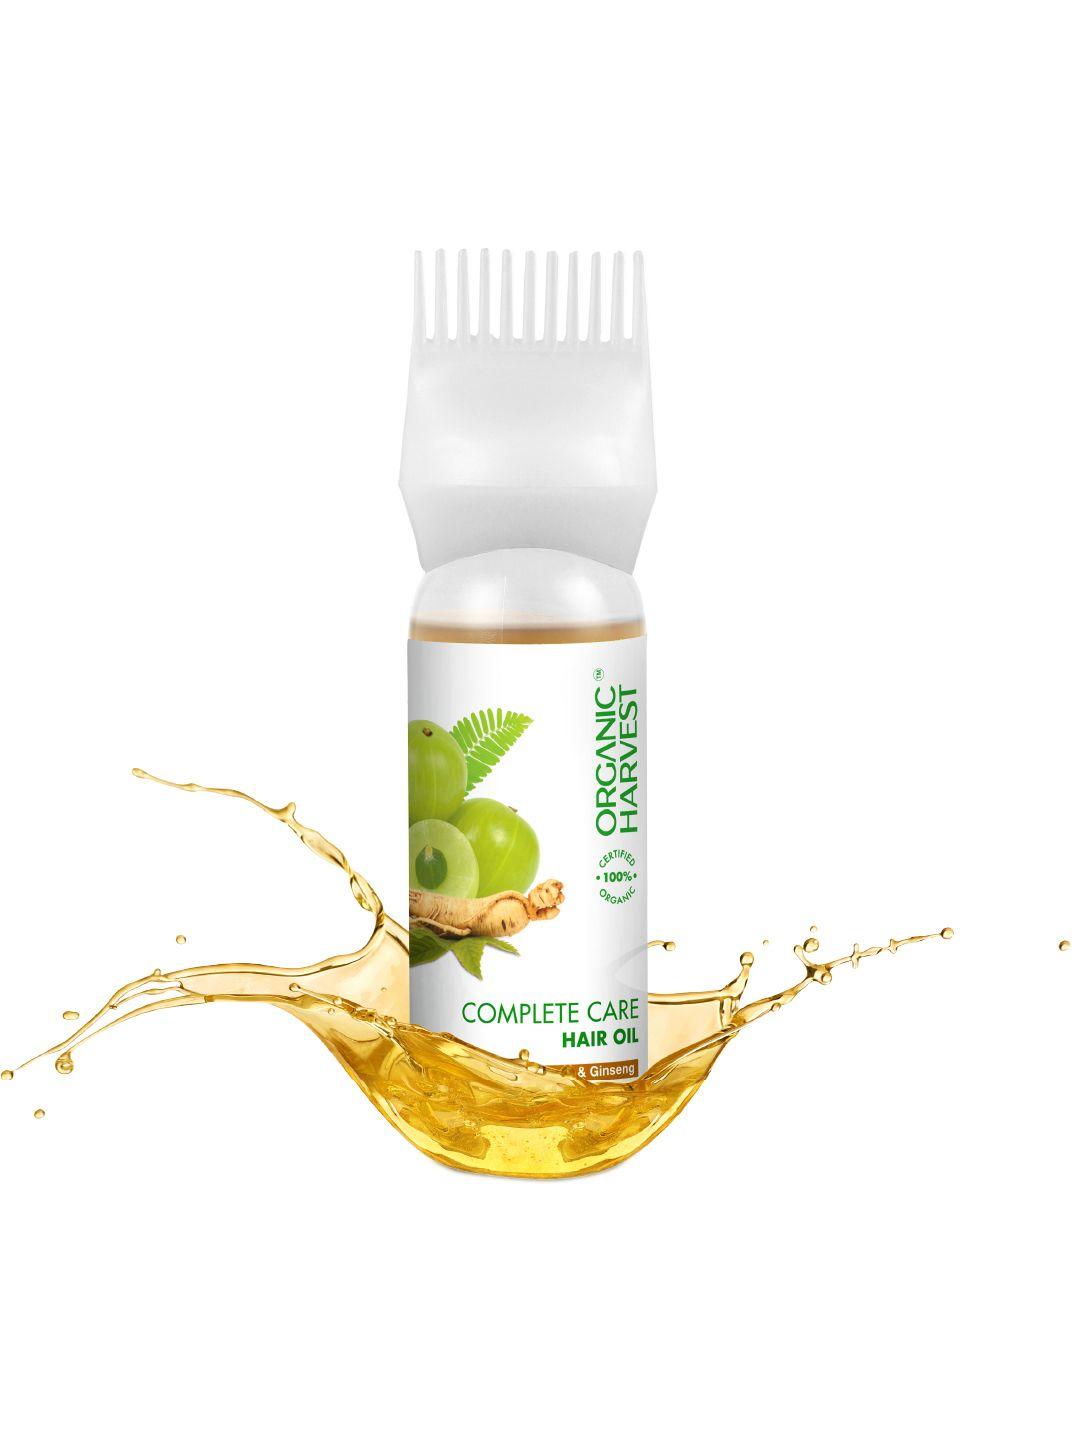 organic harvest complete care hair oil with amla & ginseng extracts